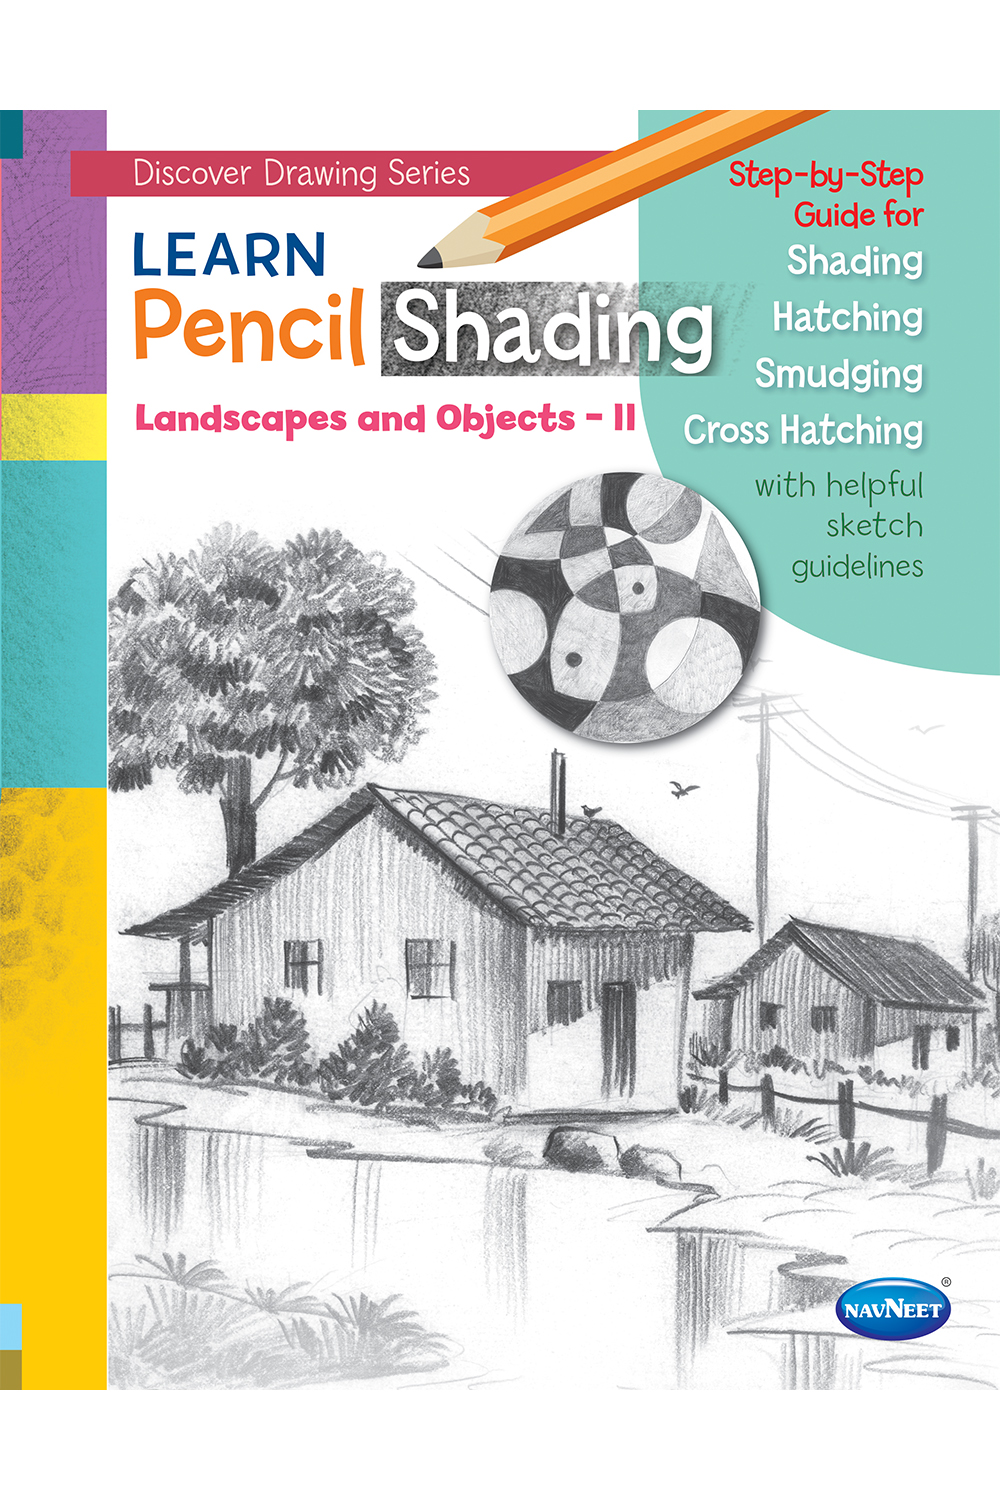 Learn Pencil shading scenery - How to Shade A Scenery Drawing With Pencil